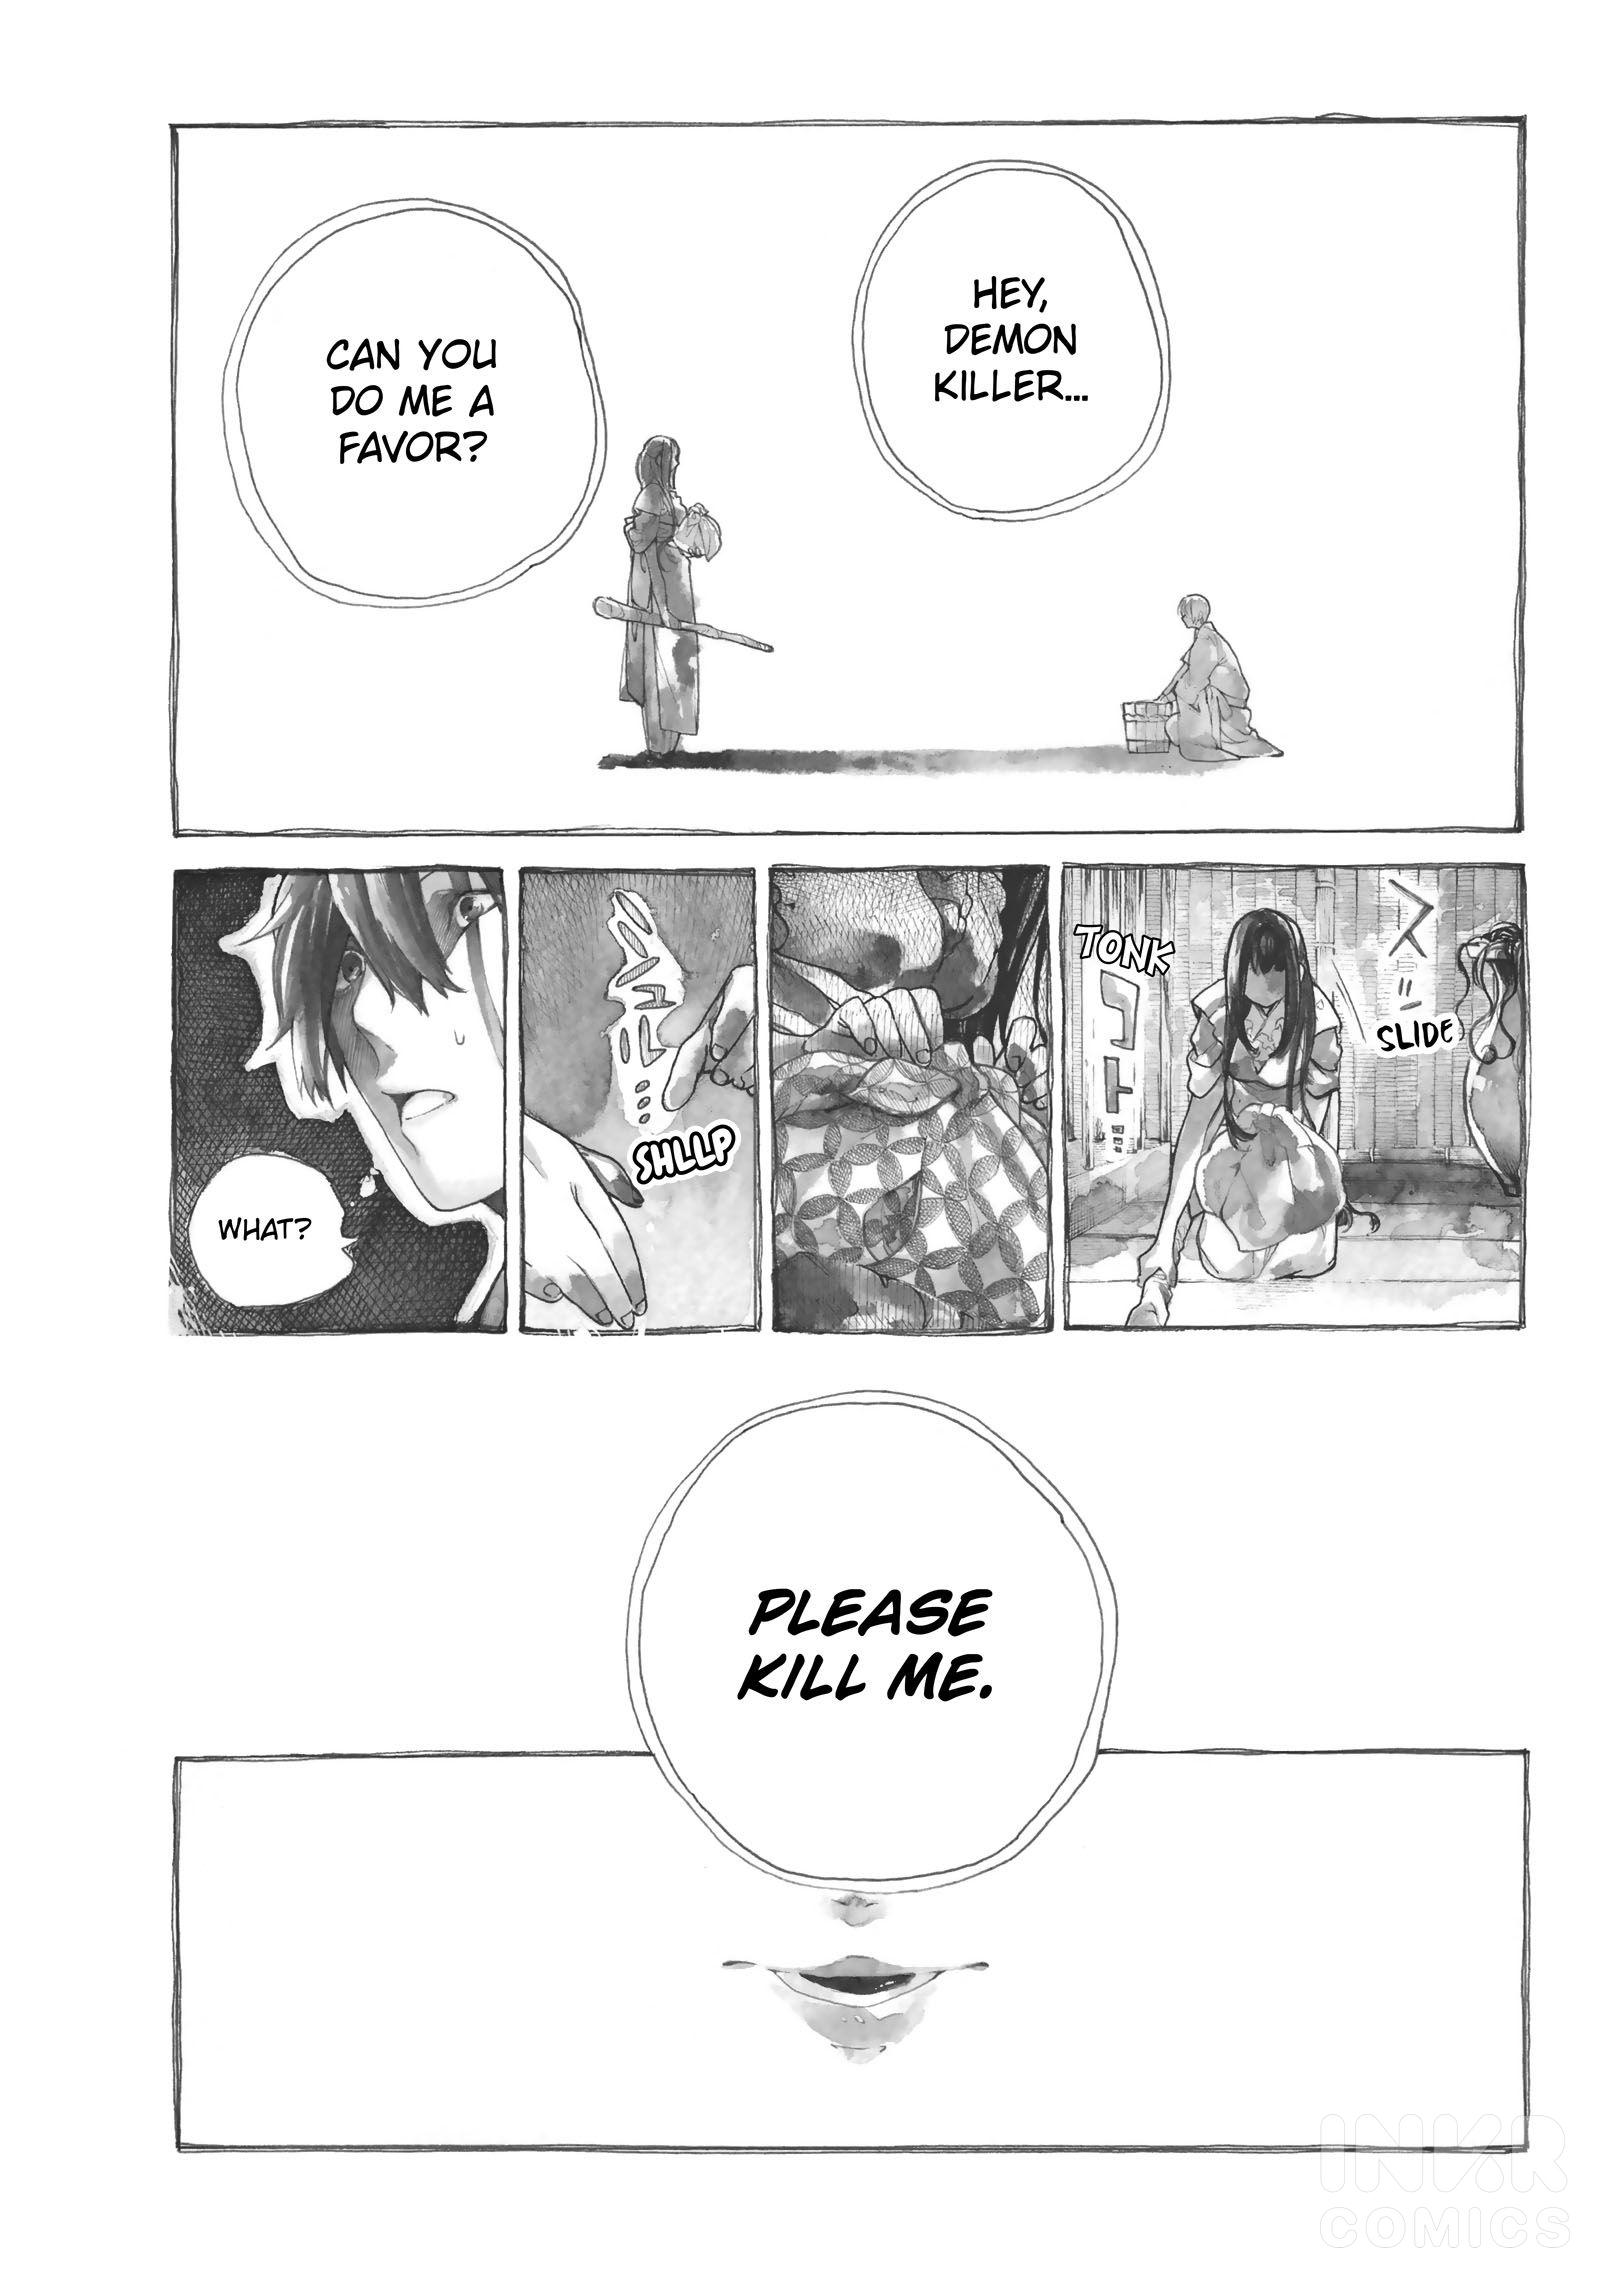 Undead Girl Murder Farce Chapter 0: Free Preview Chapter - Picture 3